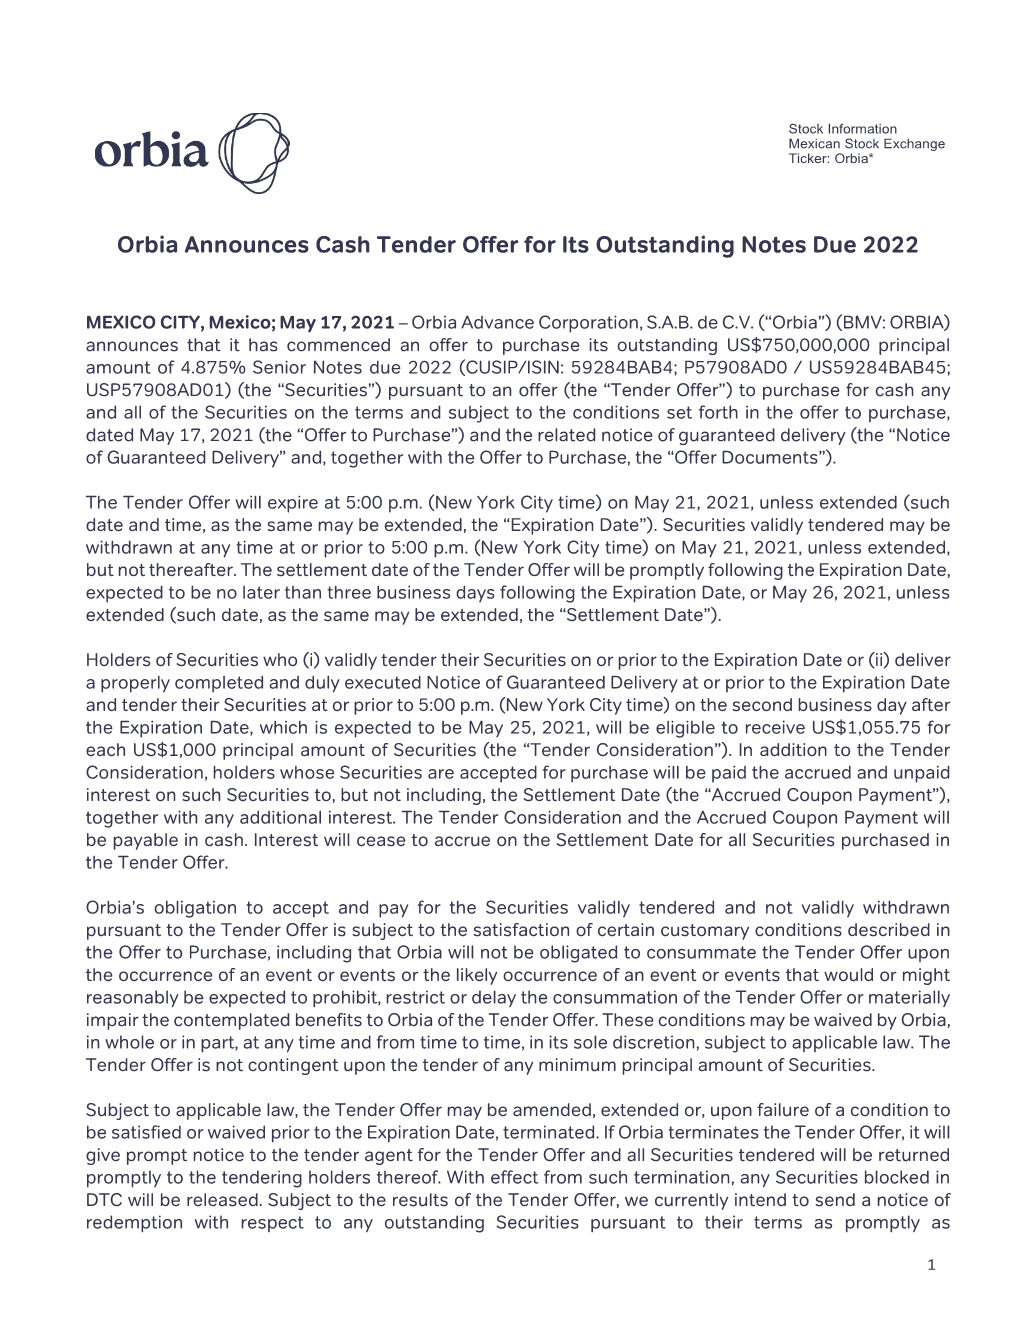 Orbia Announces Cash Tender Offer for Its Outstanding Notes Due 2022